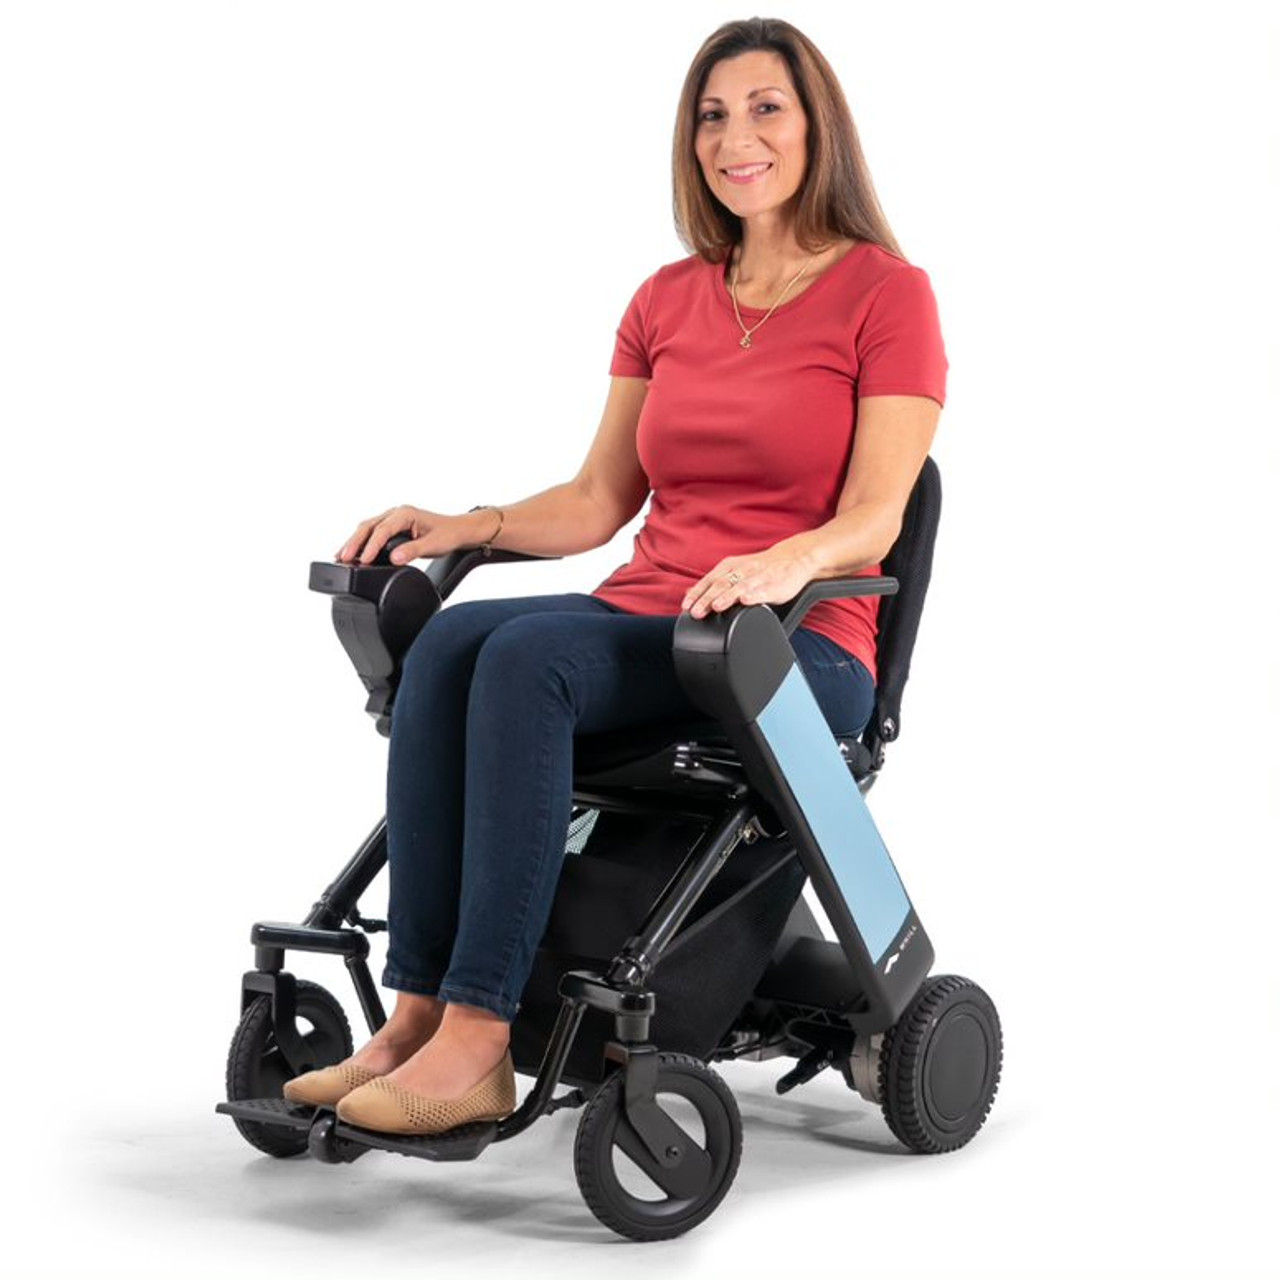 Whill Model F Power Wheelchair